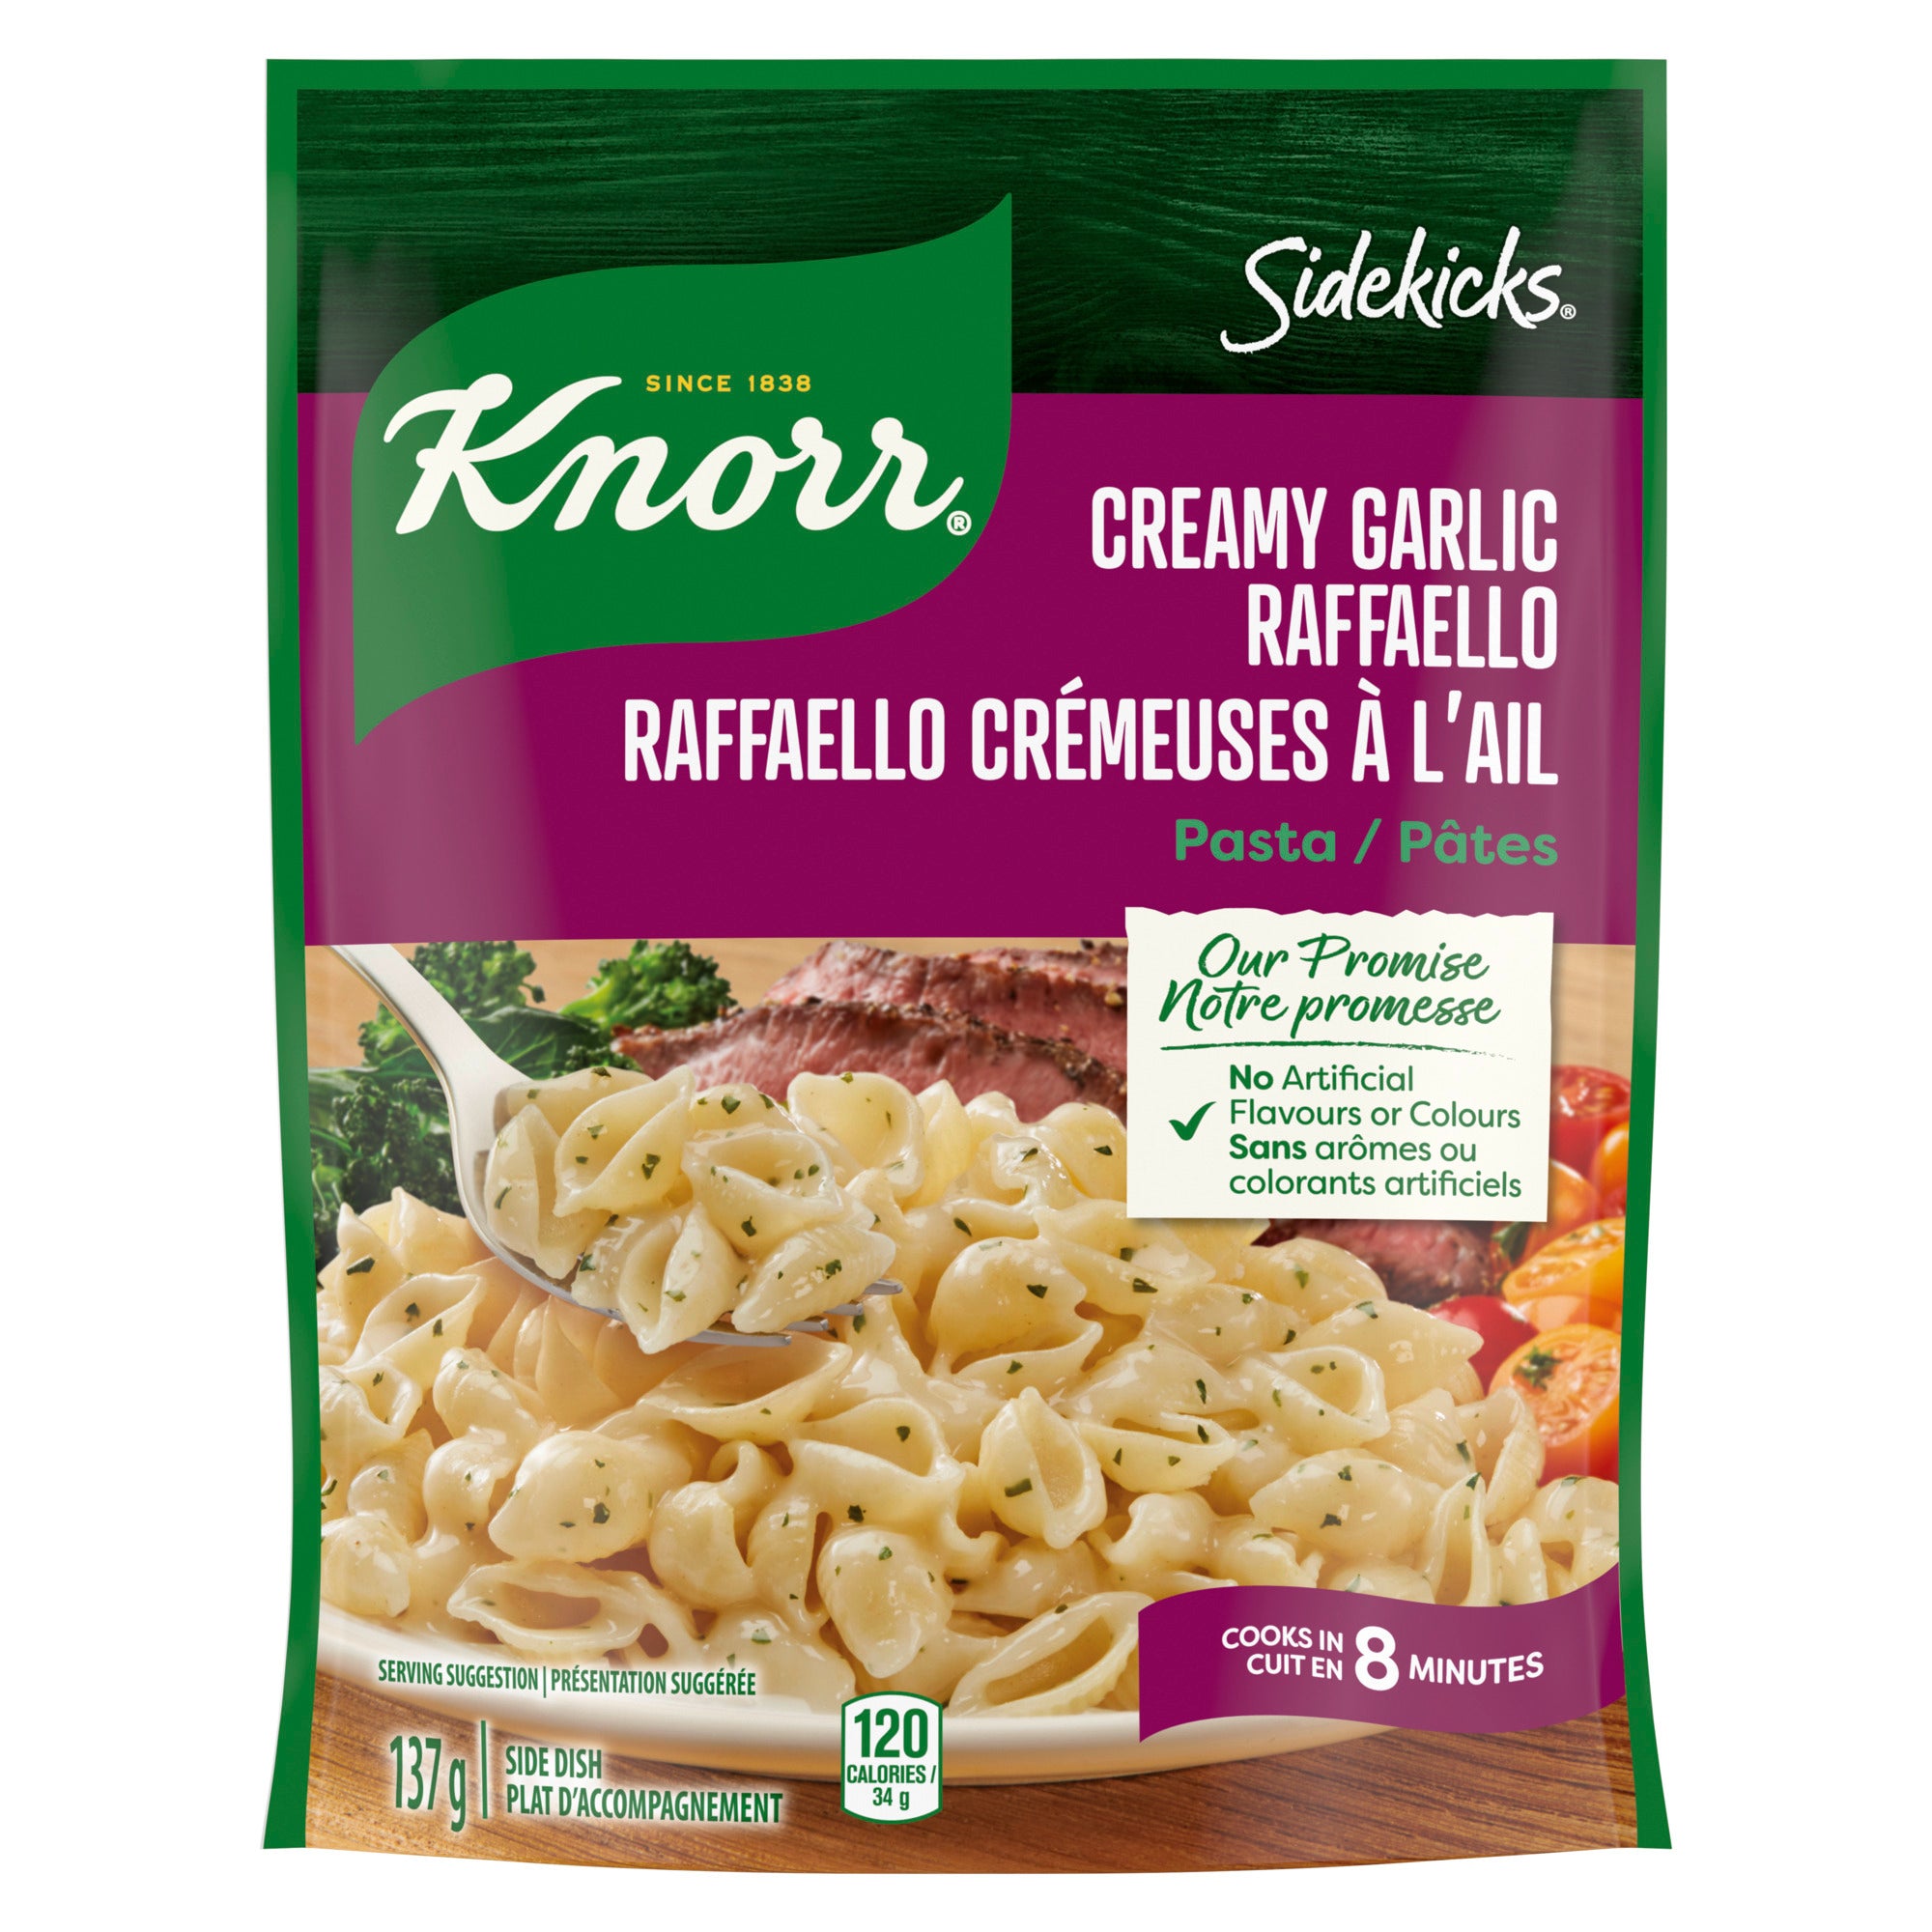 Showing the frontside view of the Knorr Sidekicks® Creamy Garlic Raffaello Pasta Side Dish 137g's green and purple packaging.